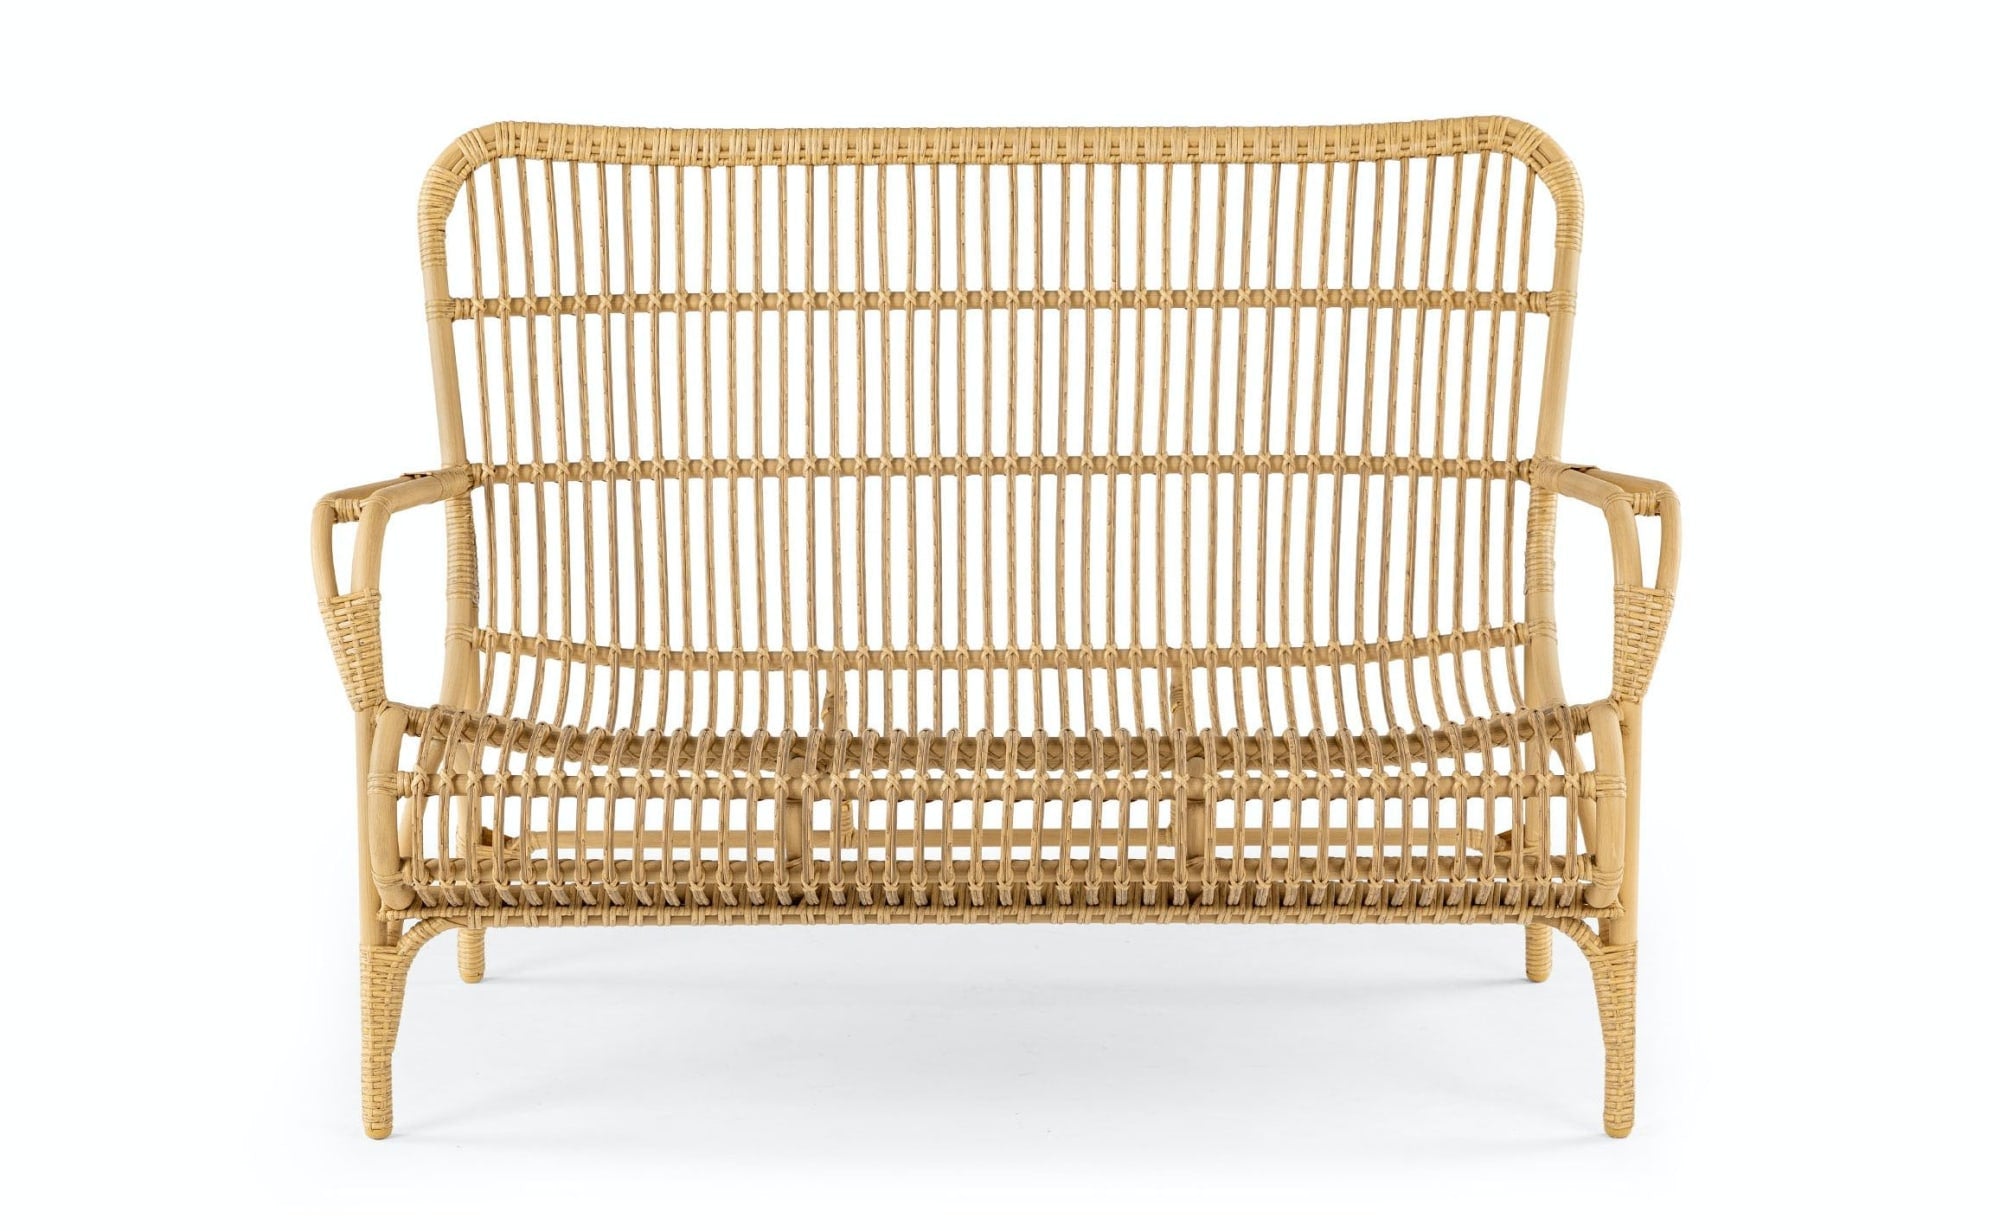 A Half-Off Wicker Bench Is One of the Major Discounts We’re Shopping Right Now